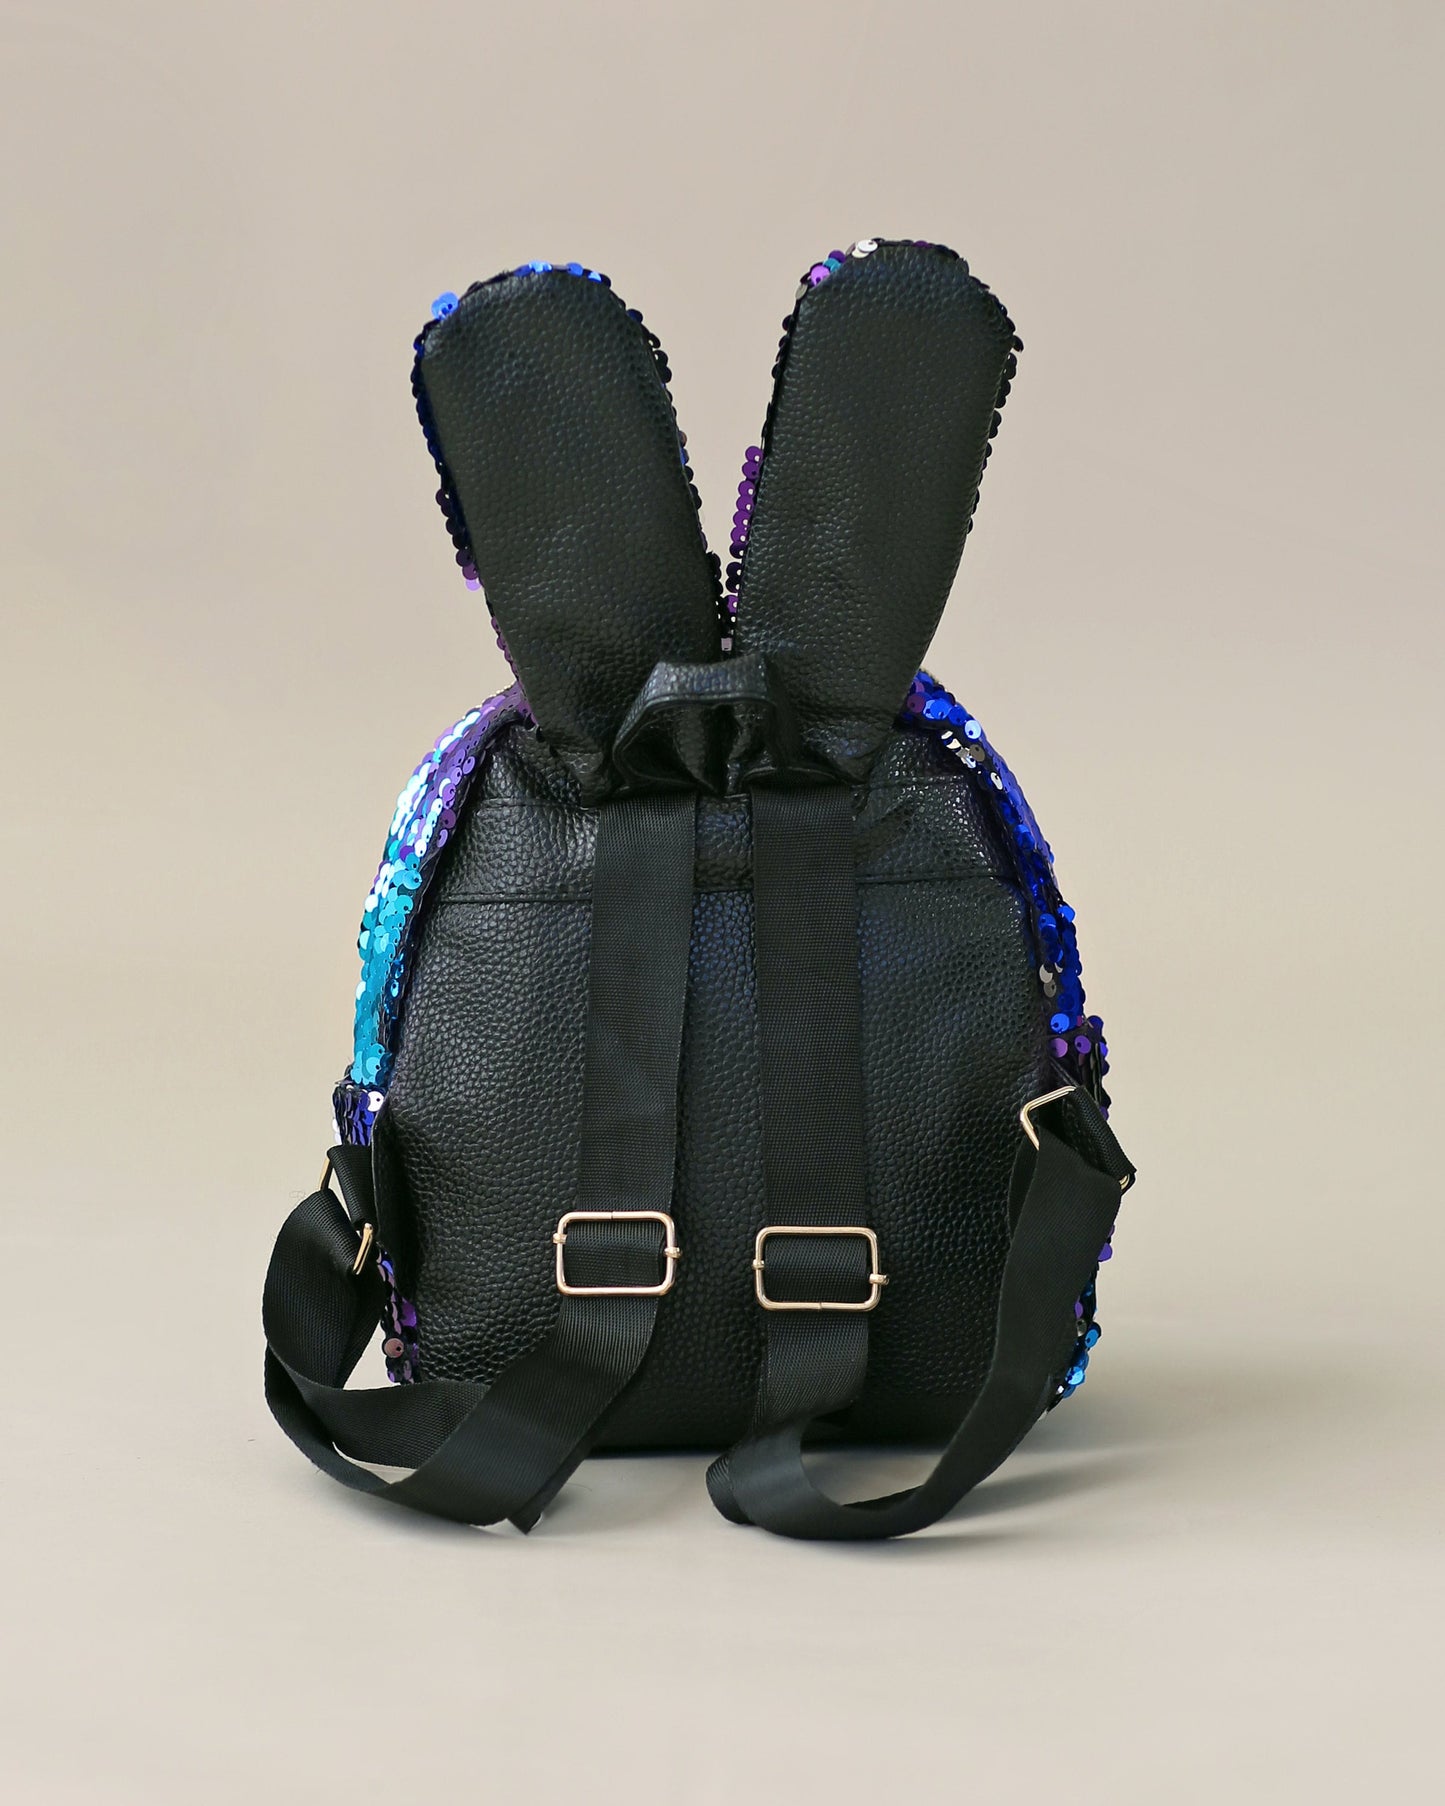 Blue and Purple Bunny Backpack - Bunny Backpack - Bunny Bag - Reversible Sequin Backpack - Sequin Backpack - Sequin Bag